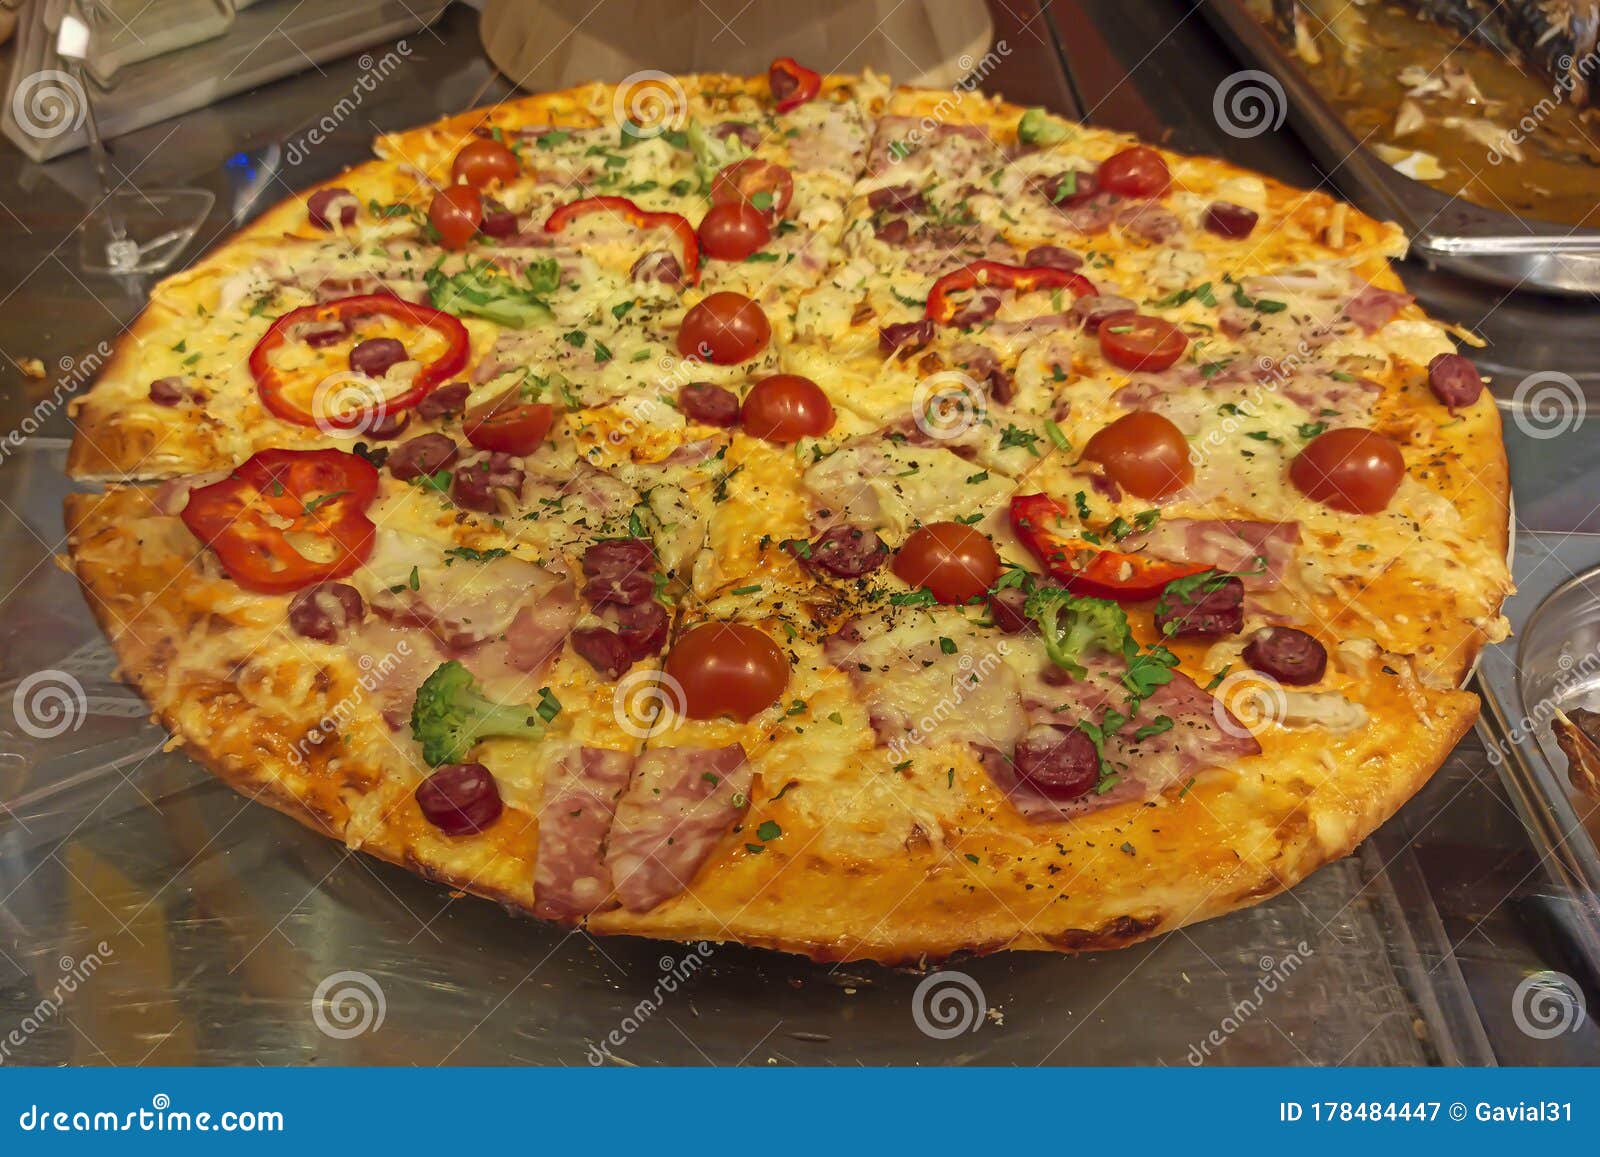 Cooking Delicious Pizza In The Kitchen Italian Pizza On The Counter After Baking Stock Image Image Of Delivery